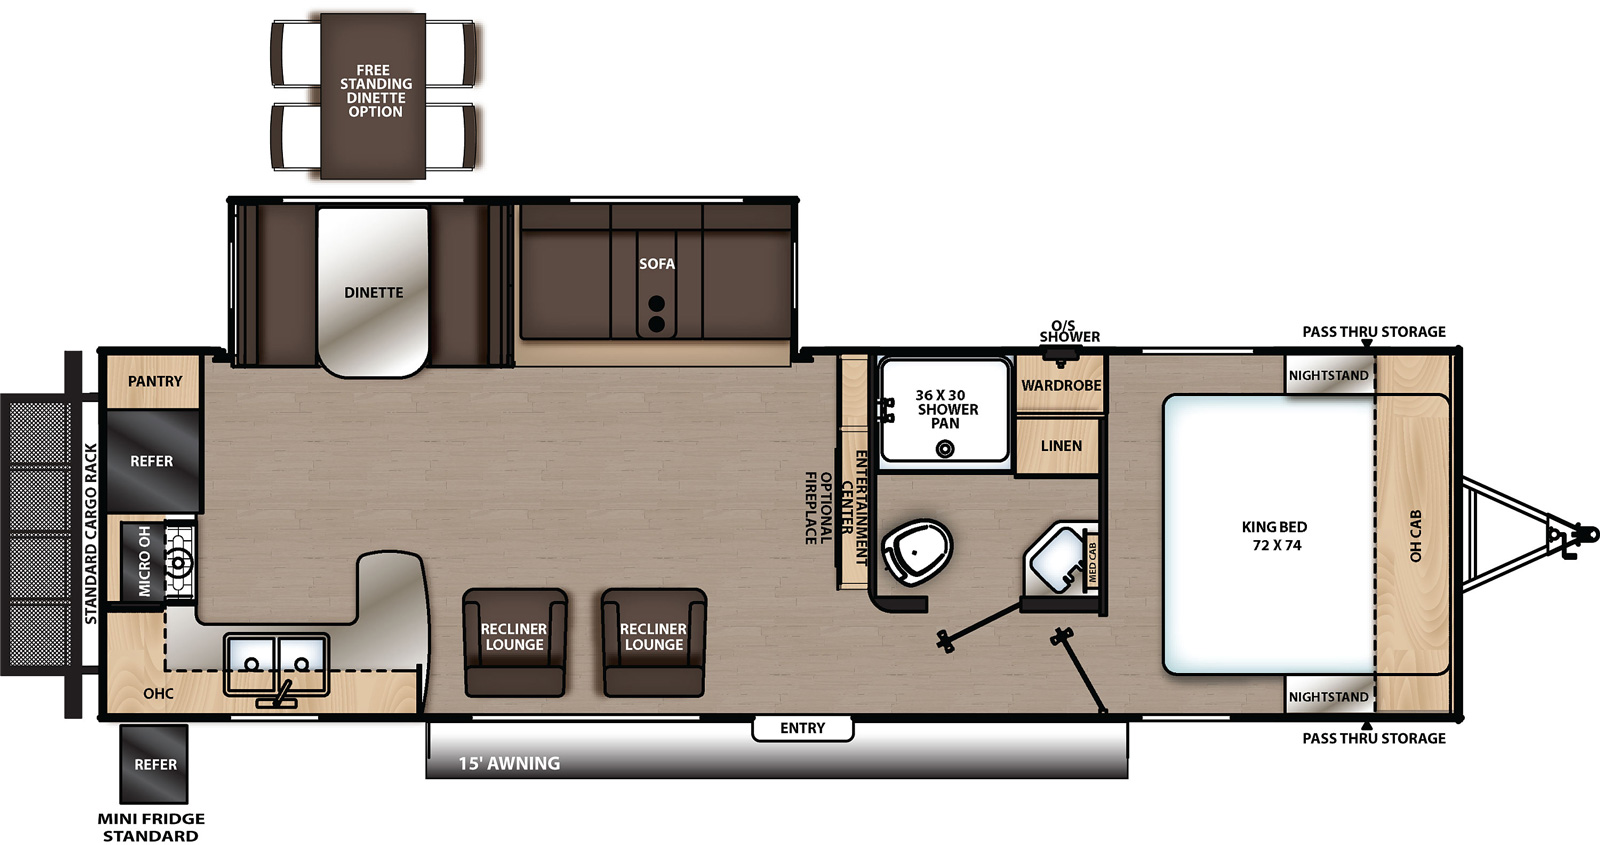 The 283RKS has one slide out on the off-door side and one entry door on the door side. Interior layout from front to back: front bedroom with foot facing king bed, nightstands on either side with cabinets overhead. Side aisle off- door side bathroom. Kitchen living dining area with entertainment center, off-door side slide out containing dinette and sofa. Door side with two lounge recliners. Rear kitchen area with double bowl sinks located on the door side, microwave, stove, refrigerator and pantry with cabinets overhead. Cargo carrying rack located on the rear exterior.